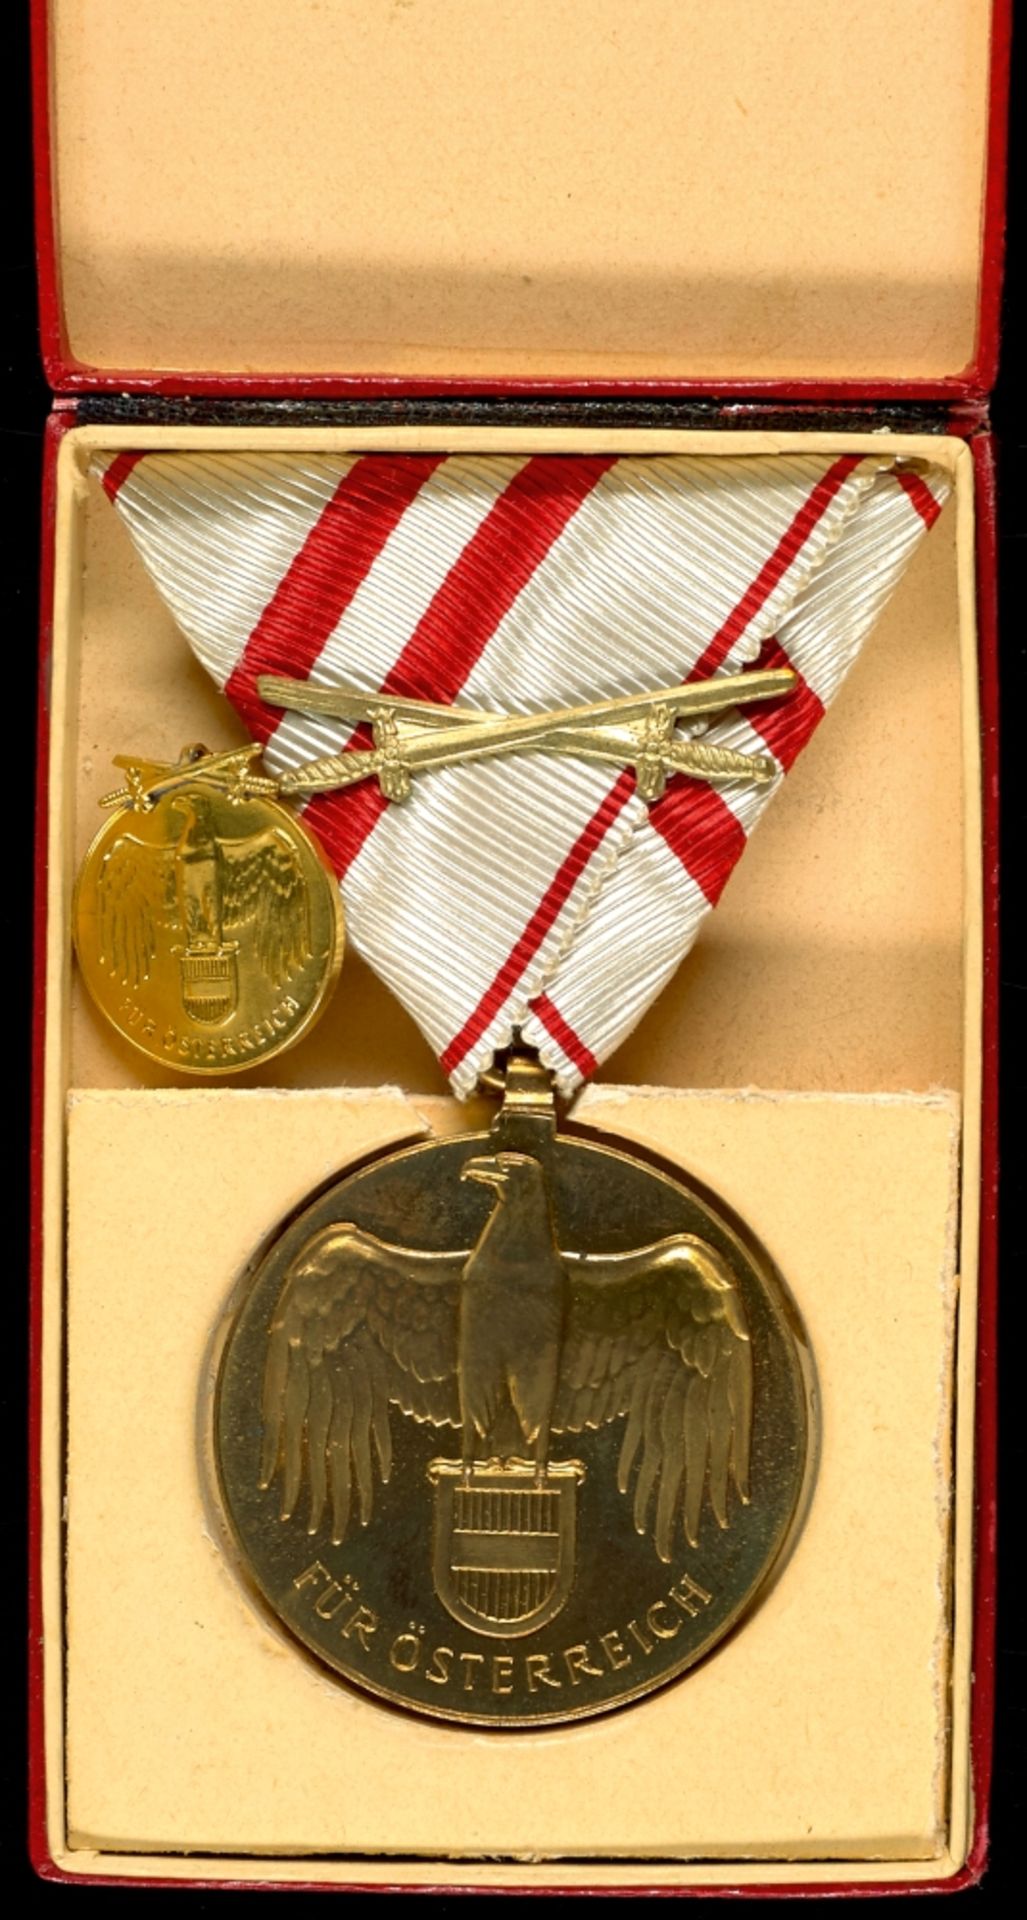 Empire Austria, war commemorative medal 1914-1918 \\for Austria\\, at the triangle ribbon with sword